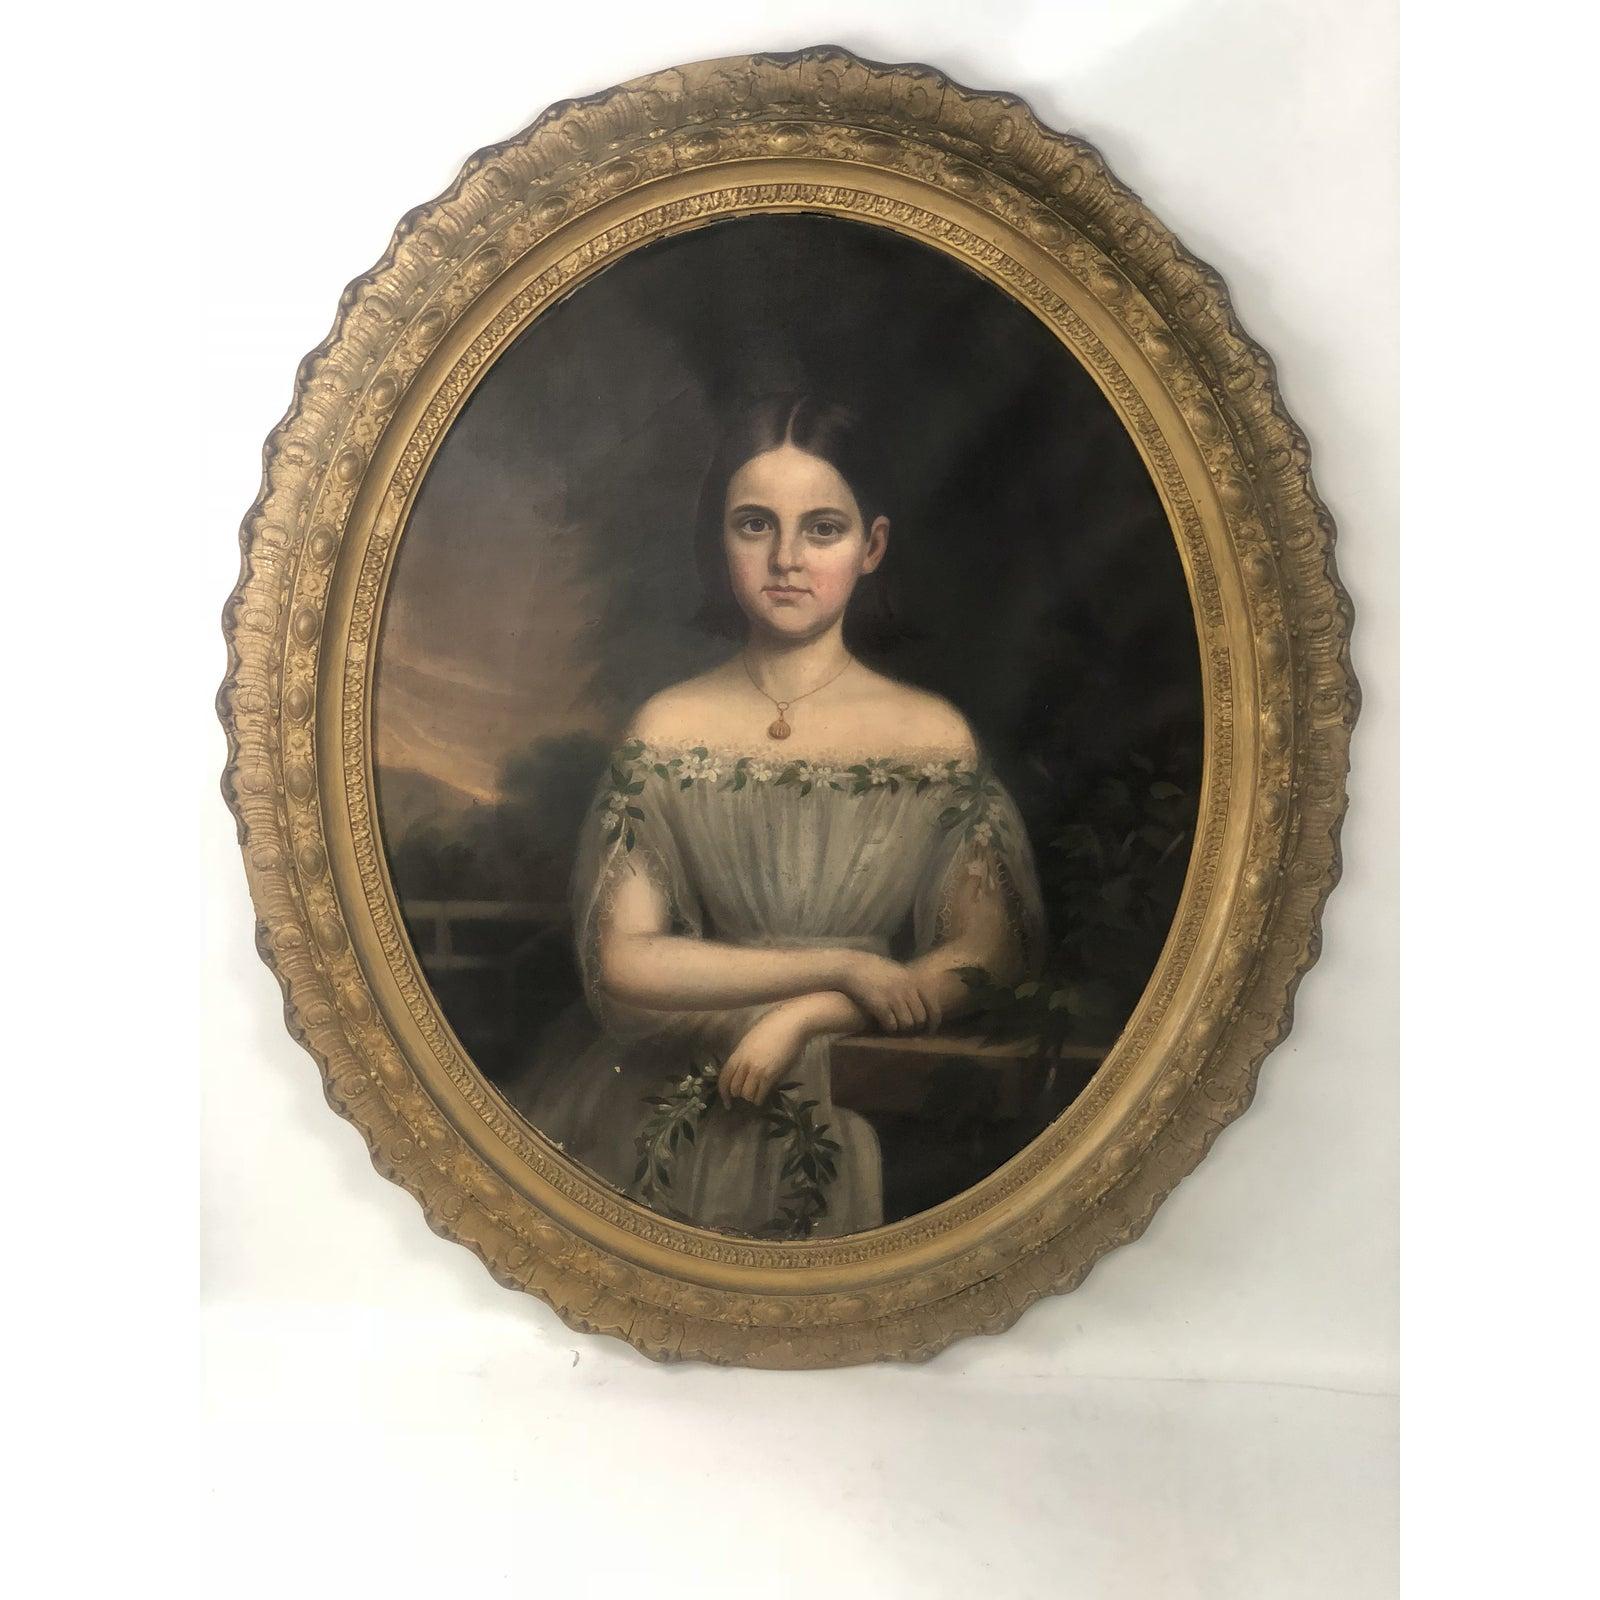 This expertly painted oil on canvass depicts a portrait of a young girl.This painting is signed and dated on back.We have providence that she was a Granddaughter Of Patrick Henry (Patriot).Purchased from the ancestors.Her name was Sarah Watkins.The